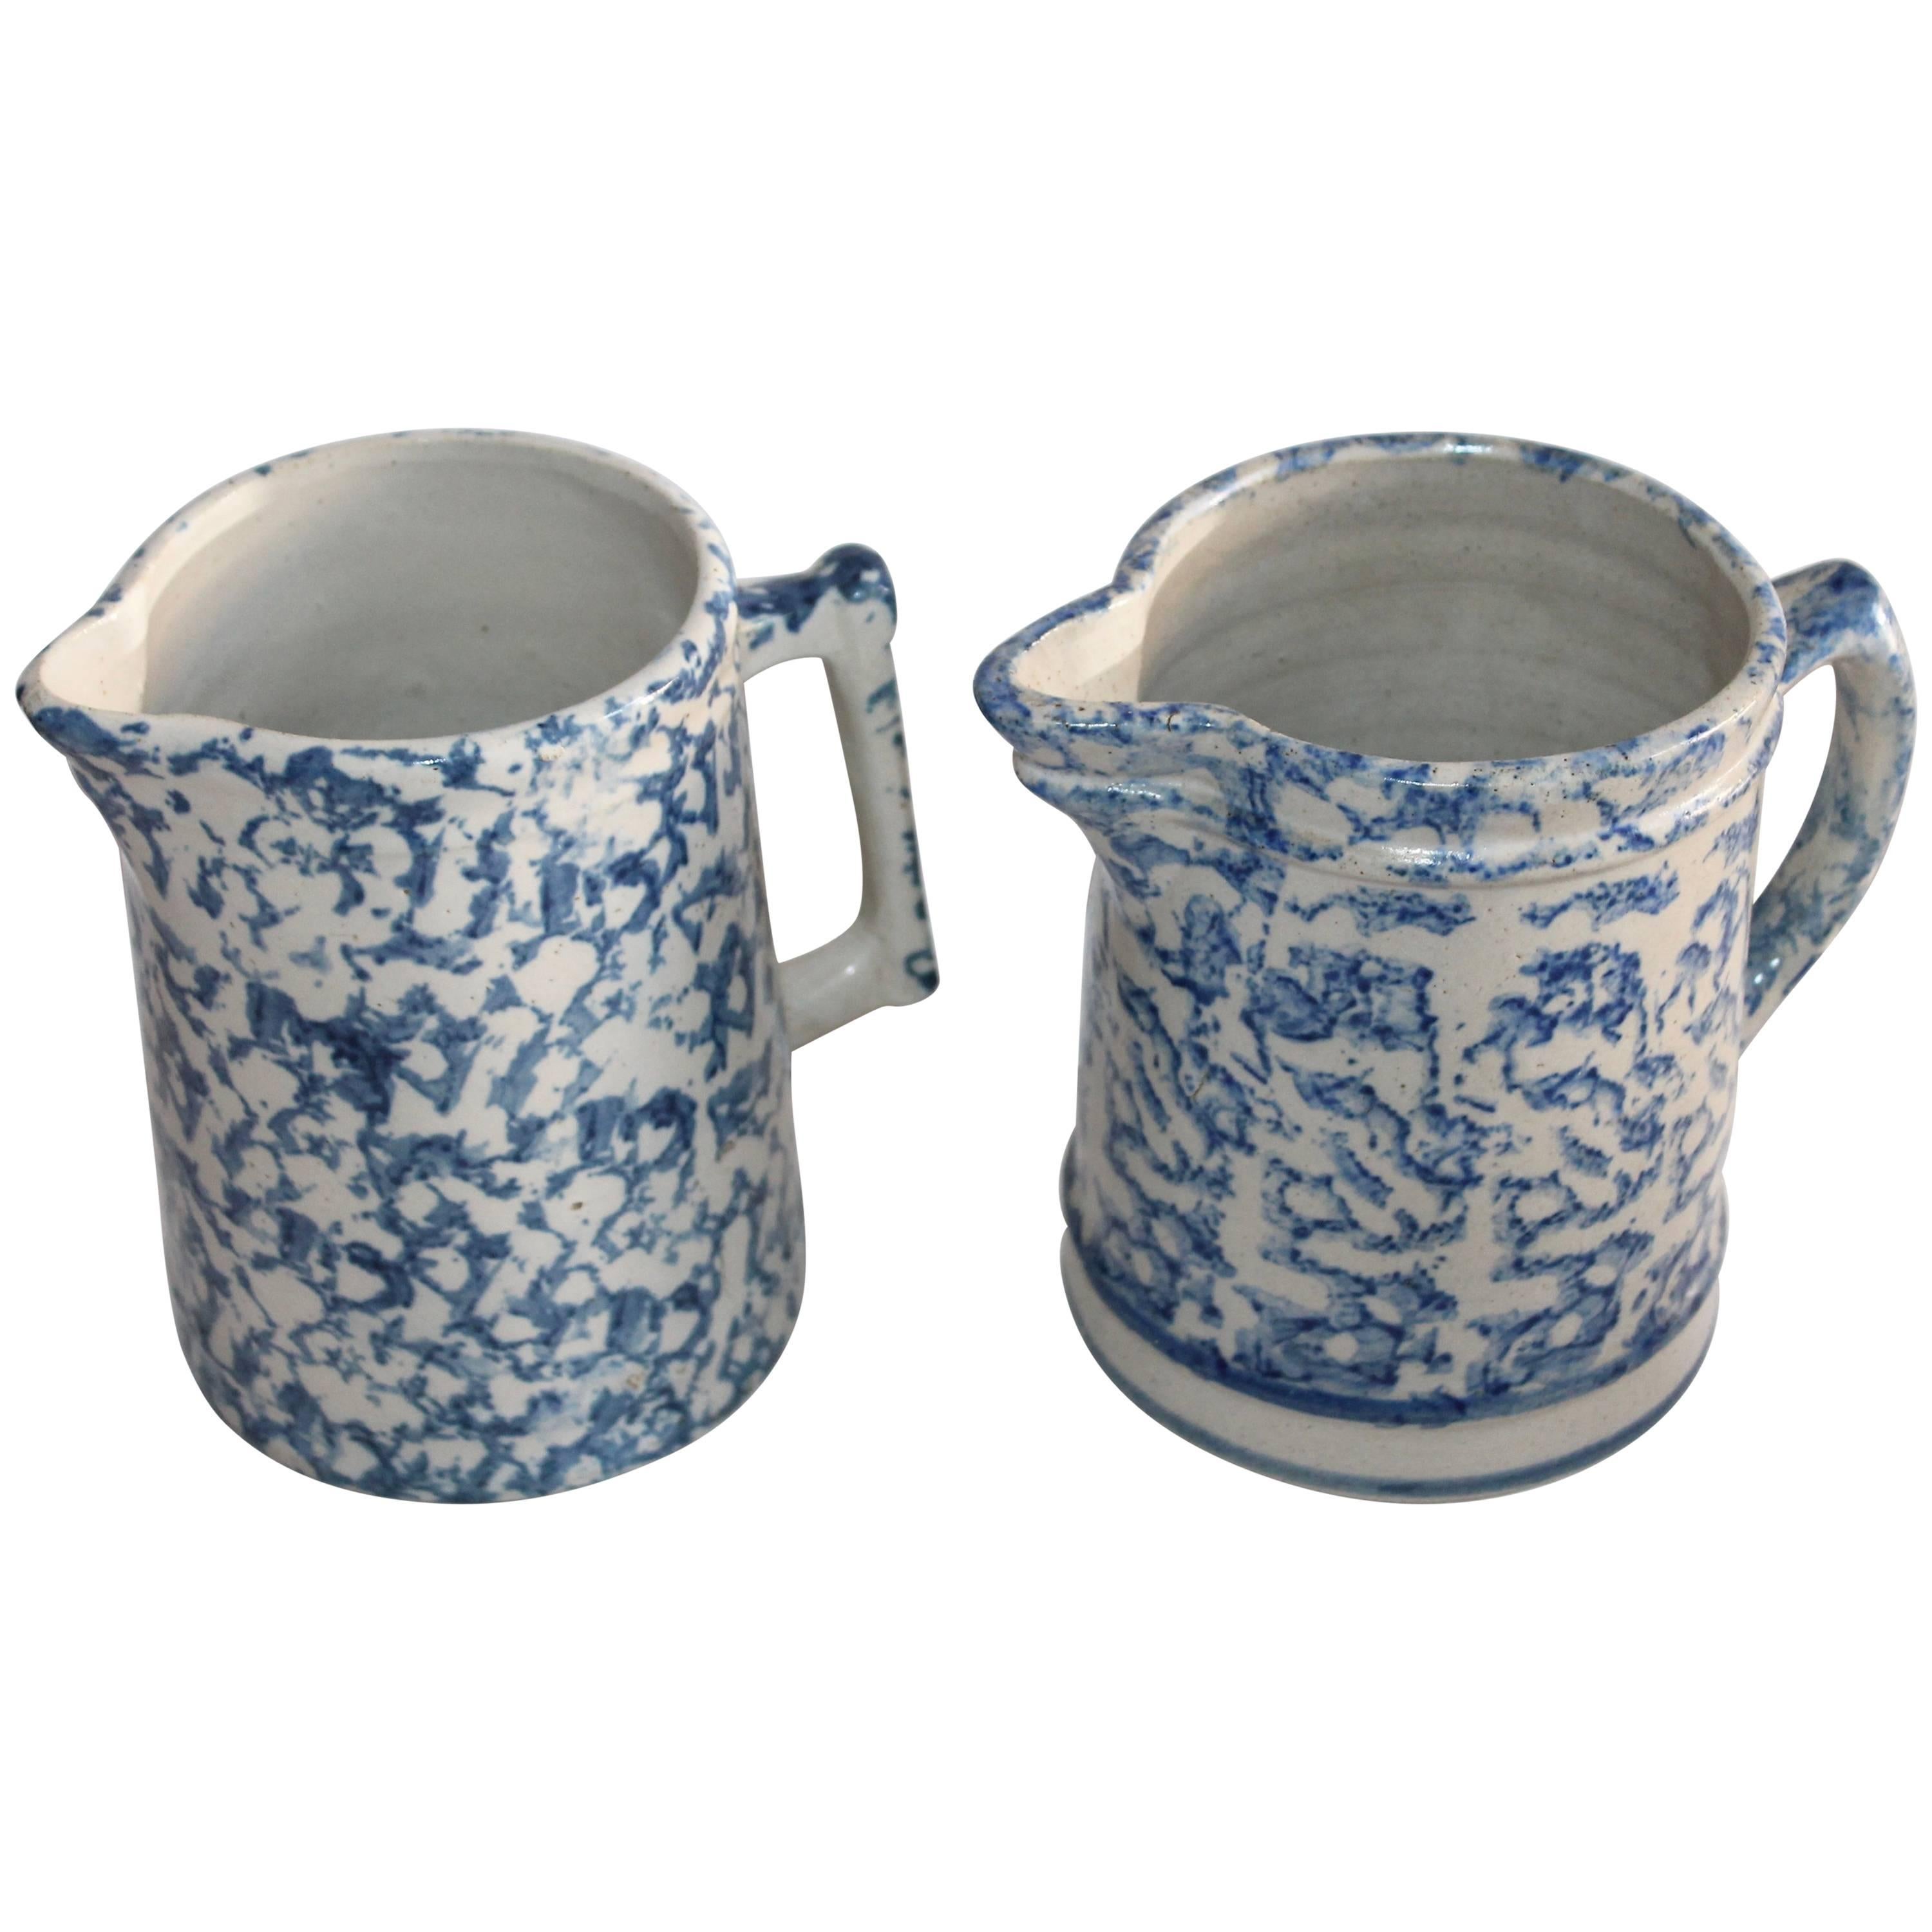 Pair of 19th Century Sponge Ware Pottery Pitchers For Sale